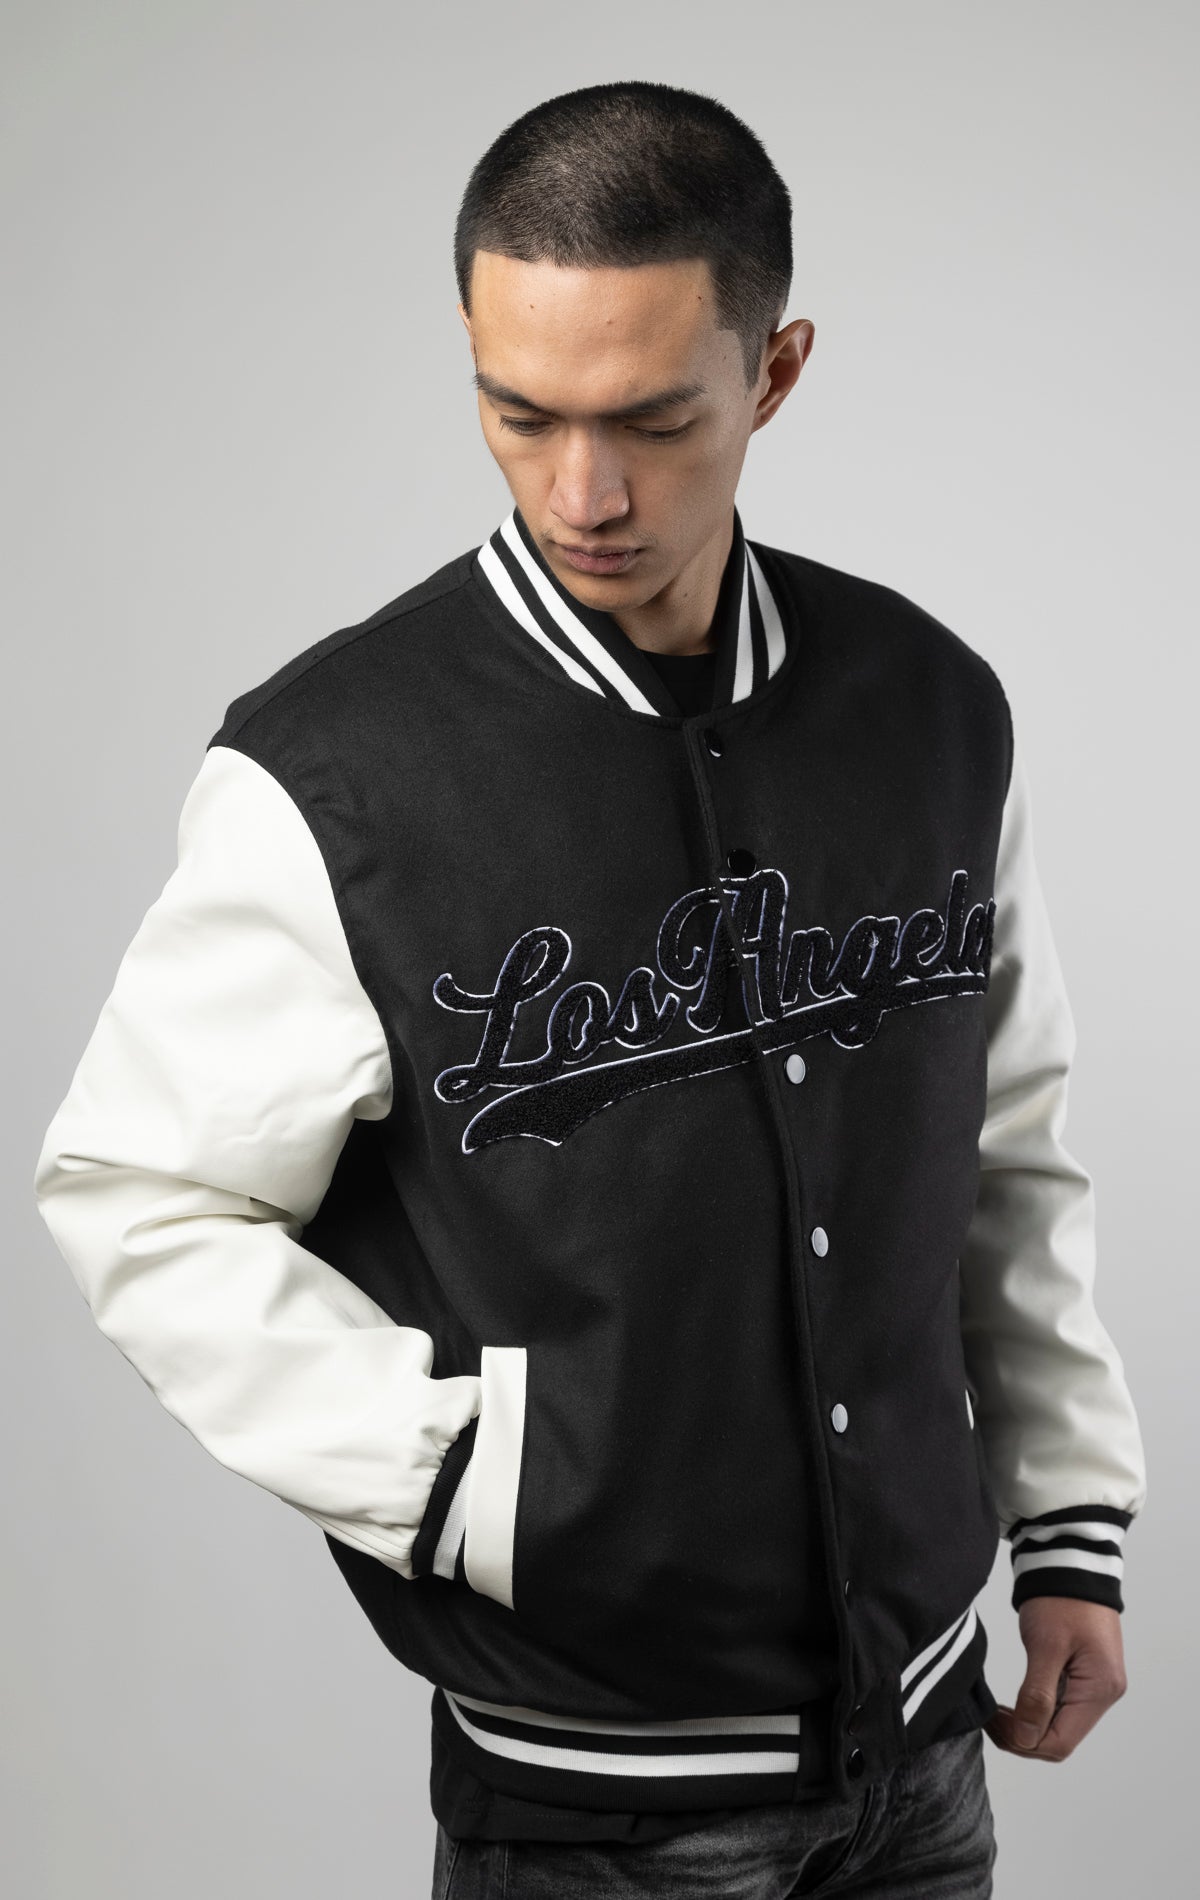 Black and white Los Angeles varsity jacket featuring a sleek button closure, ribbed cuffs, and a satin lining for added comfort.